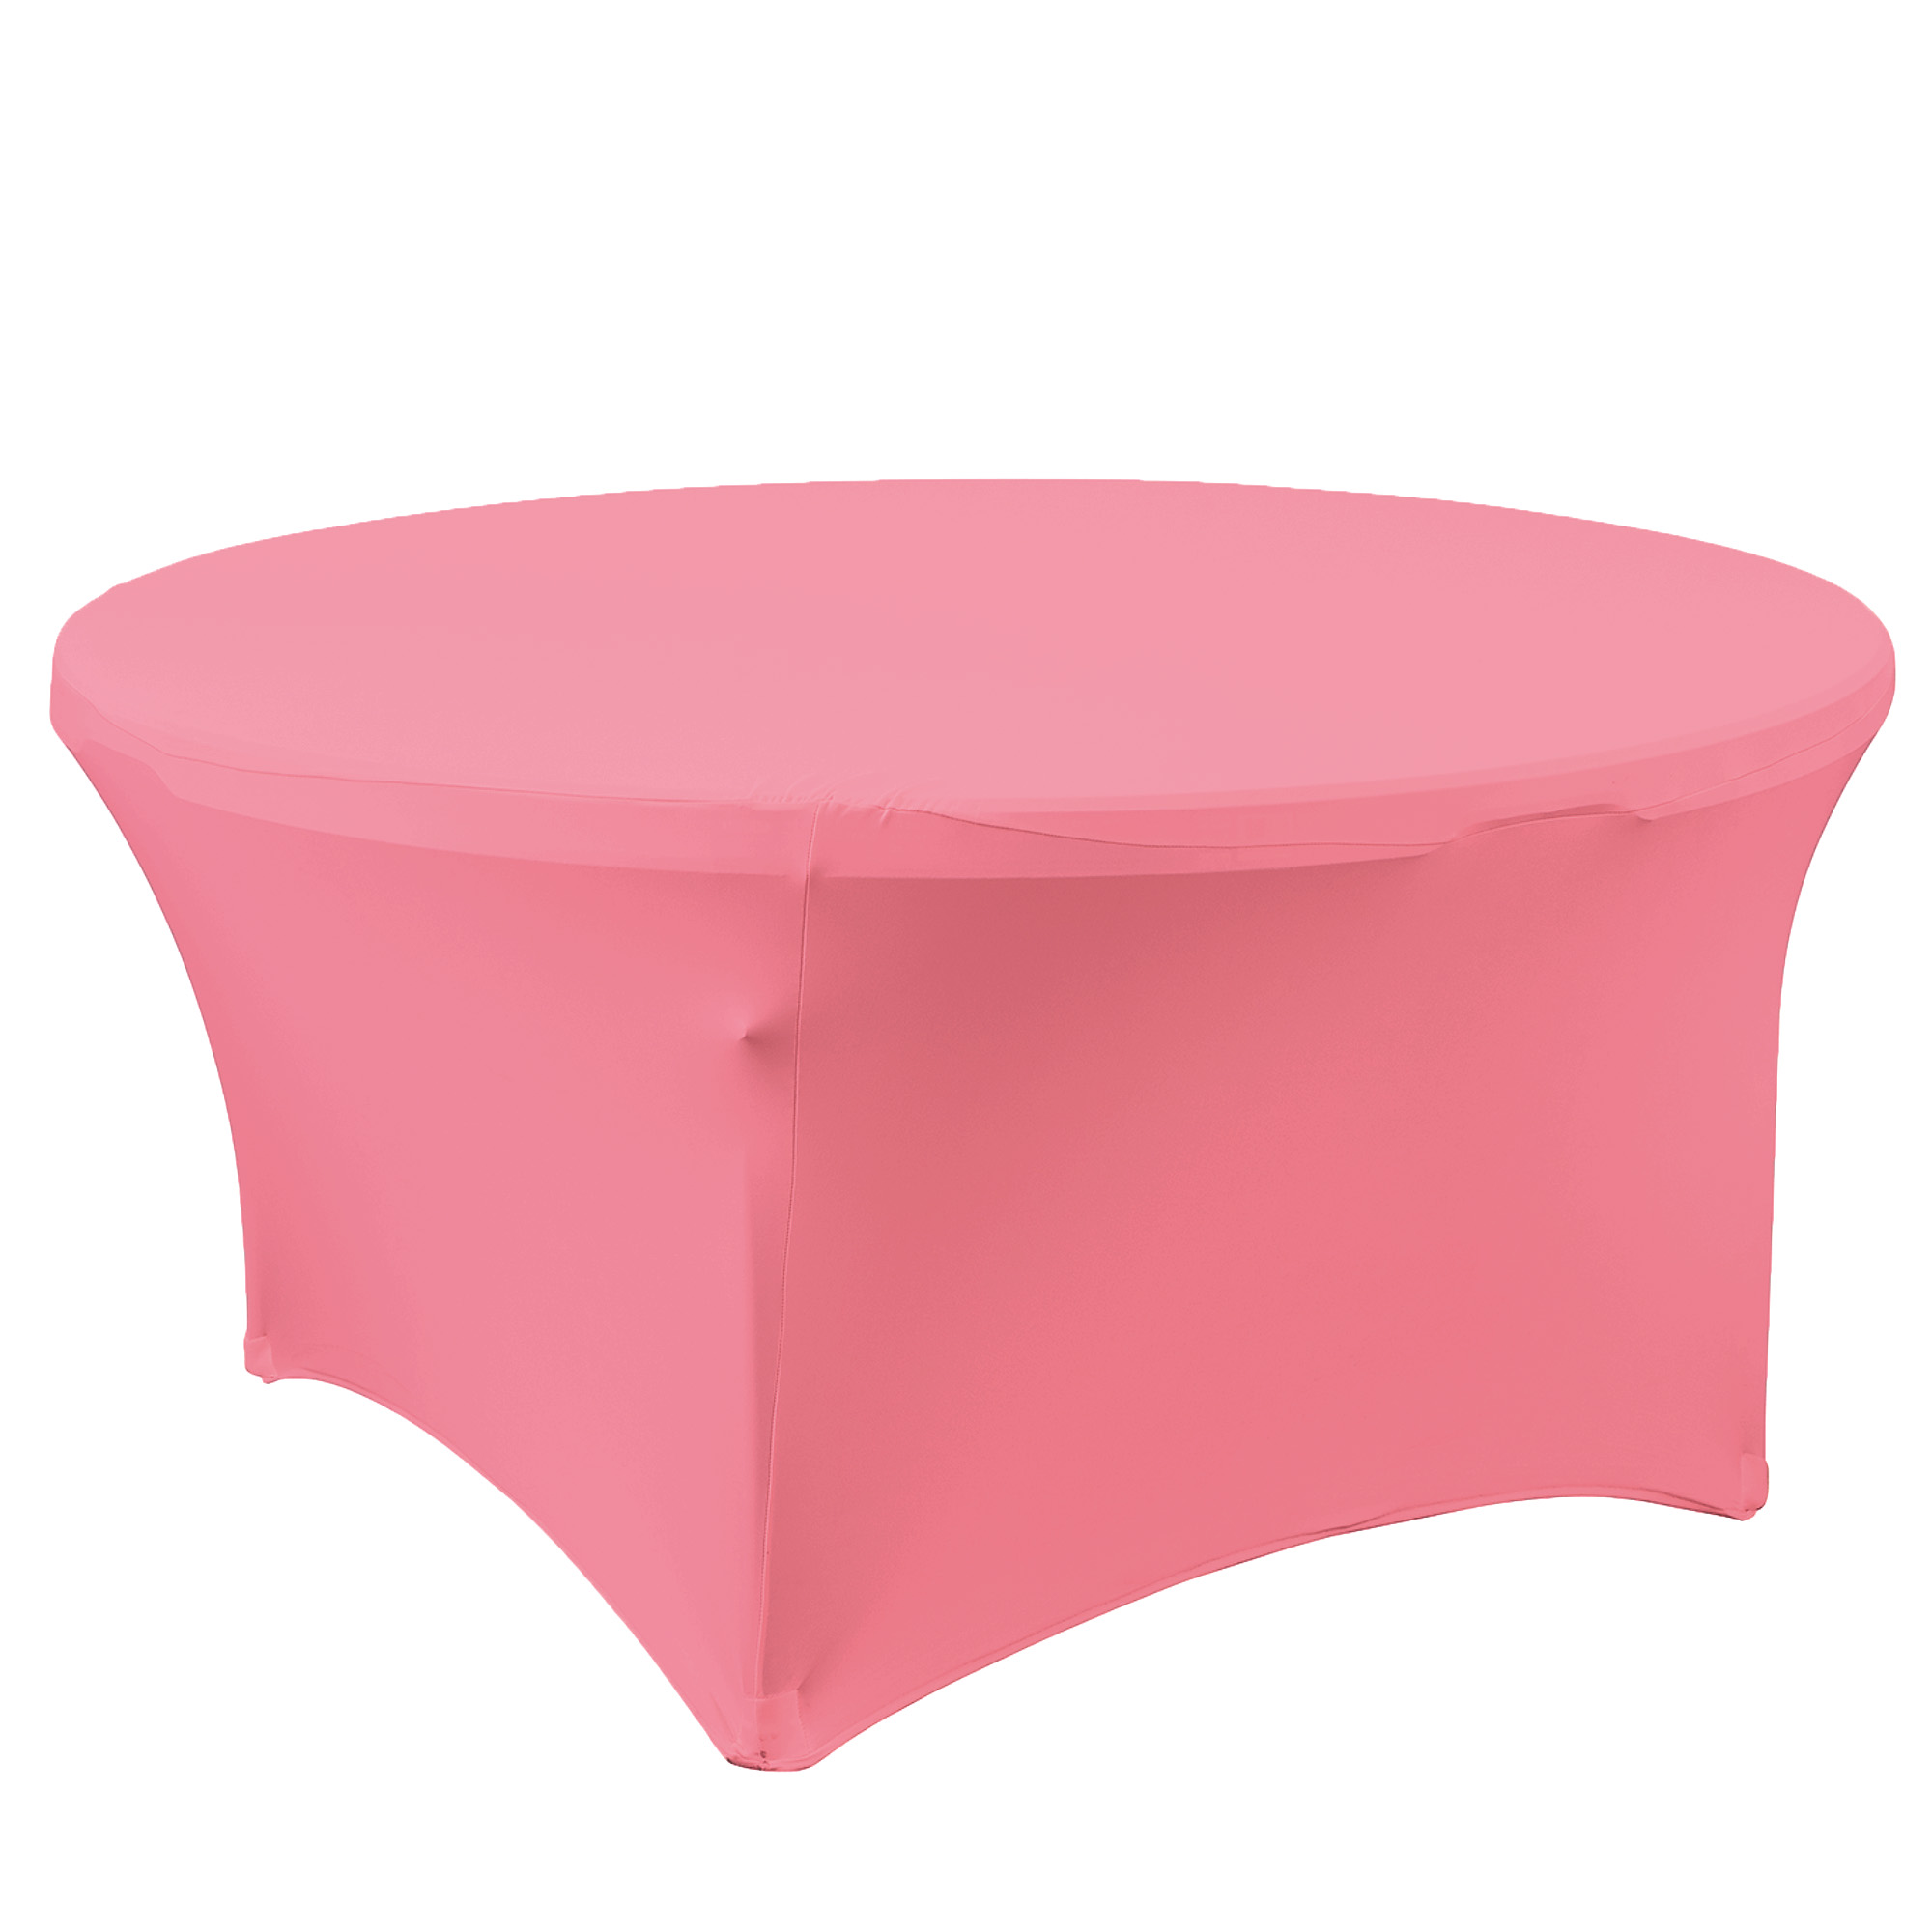 Spandex Round Table Cover 72" - Pink